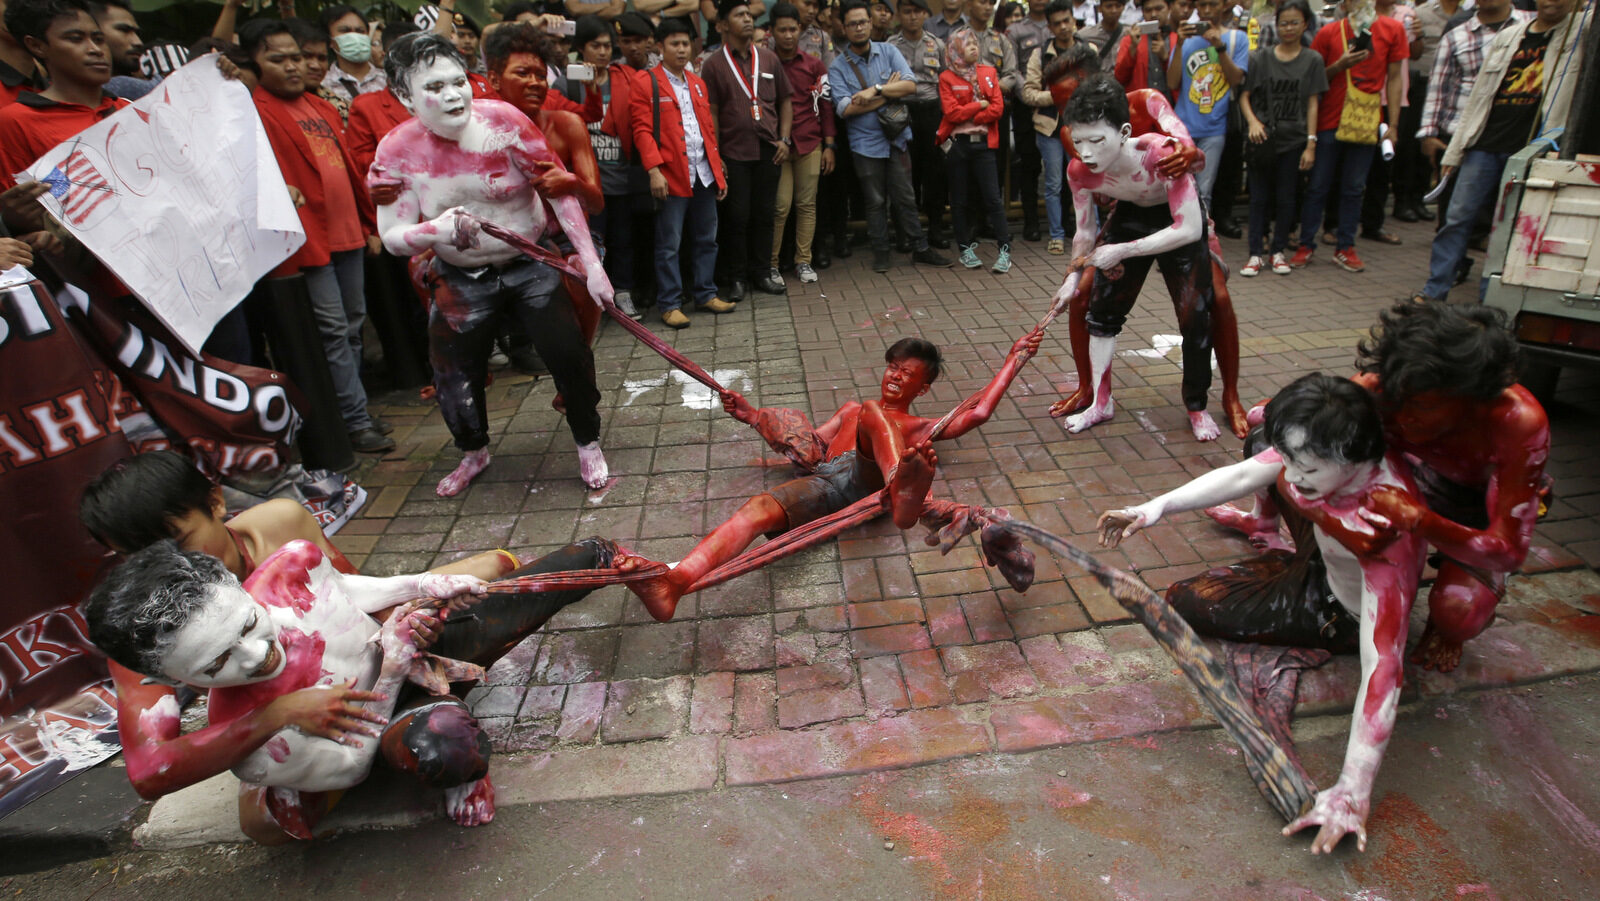 Students with painted bodies perform a skit during a demonstration against the U.S. mining giant Freeport-McMoRan Copper & Gold Inc. in Jakarta, Indonesia, Friday, Feb. 24, 2017. Dozens of students staged the protest demanding the New Orleans-based mining company close its mine in Papua province saying that it siphons of the region's wealth and gives it little in return. (AP/Achmad Ibrahim)